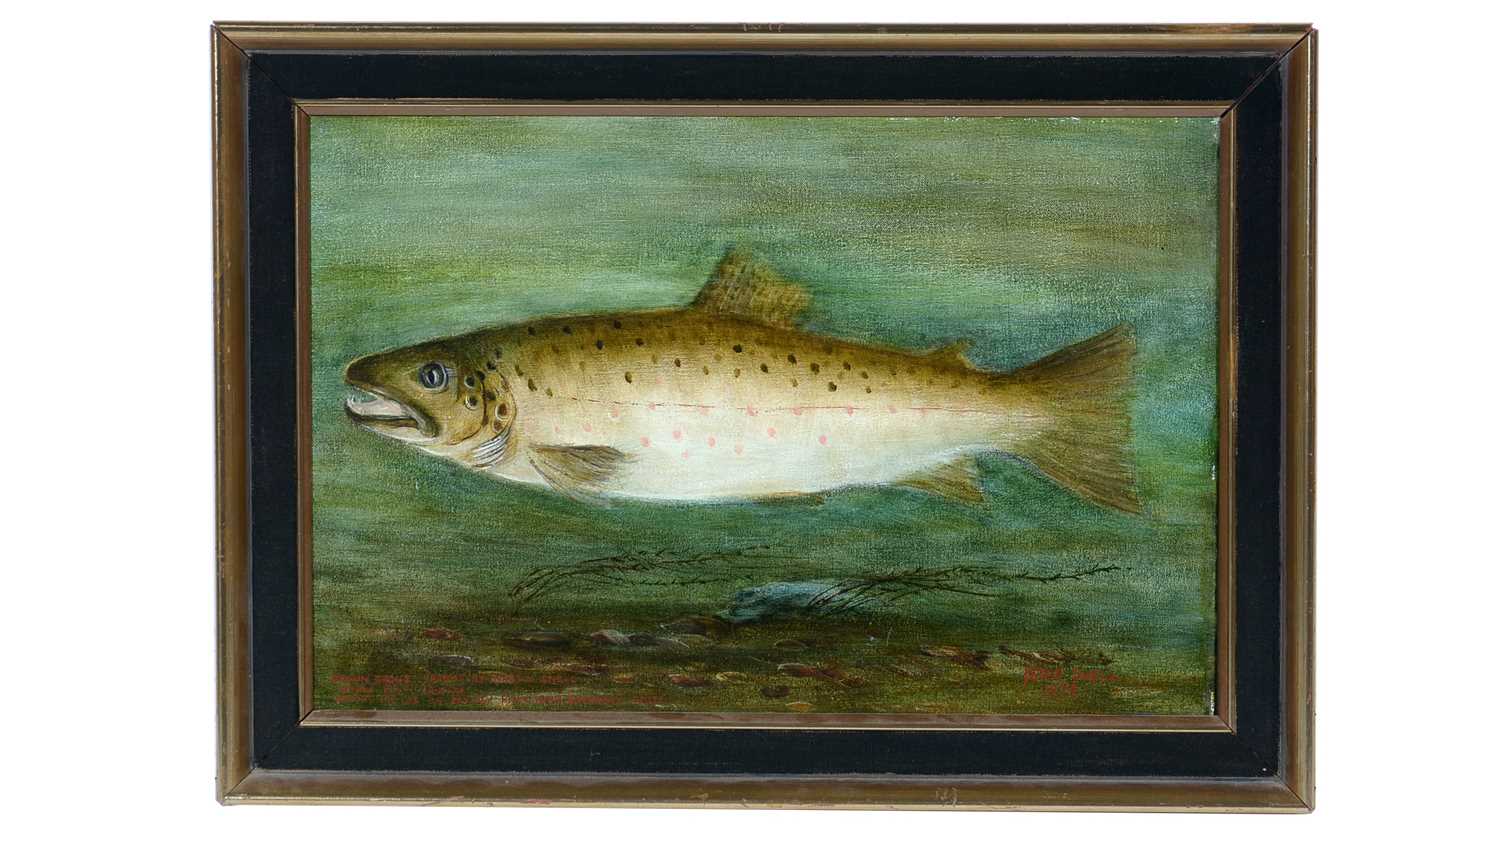 Lot 1107 - Peter Snell - Brown Trout Caught by Martin Snell, River Avon, 1974 | oil